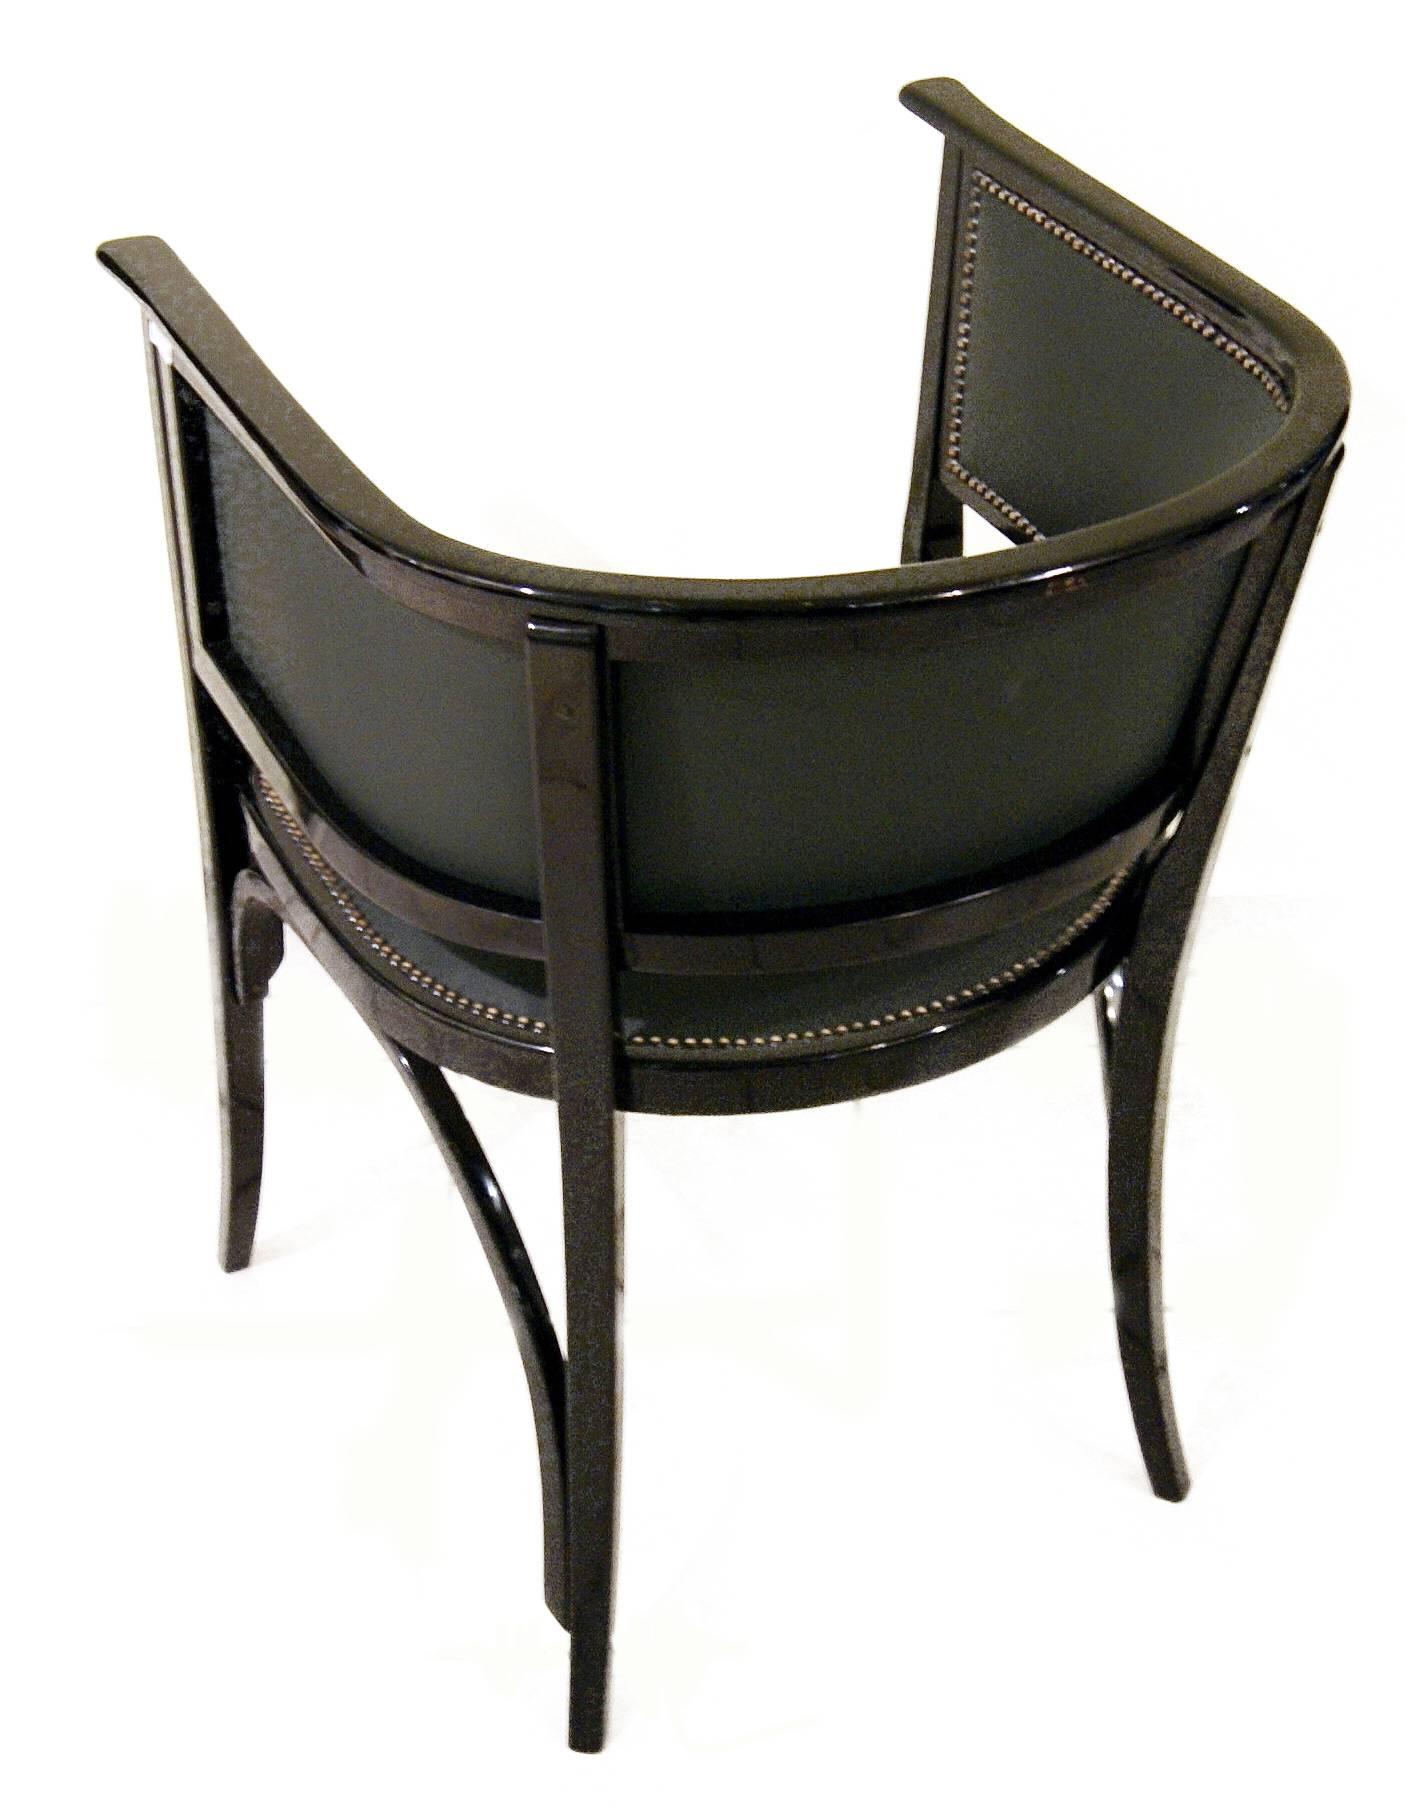 Stained Thonet Vienna Art Nouveau Armchair Number 6575, circa 1905